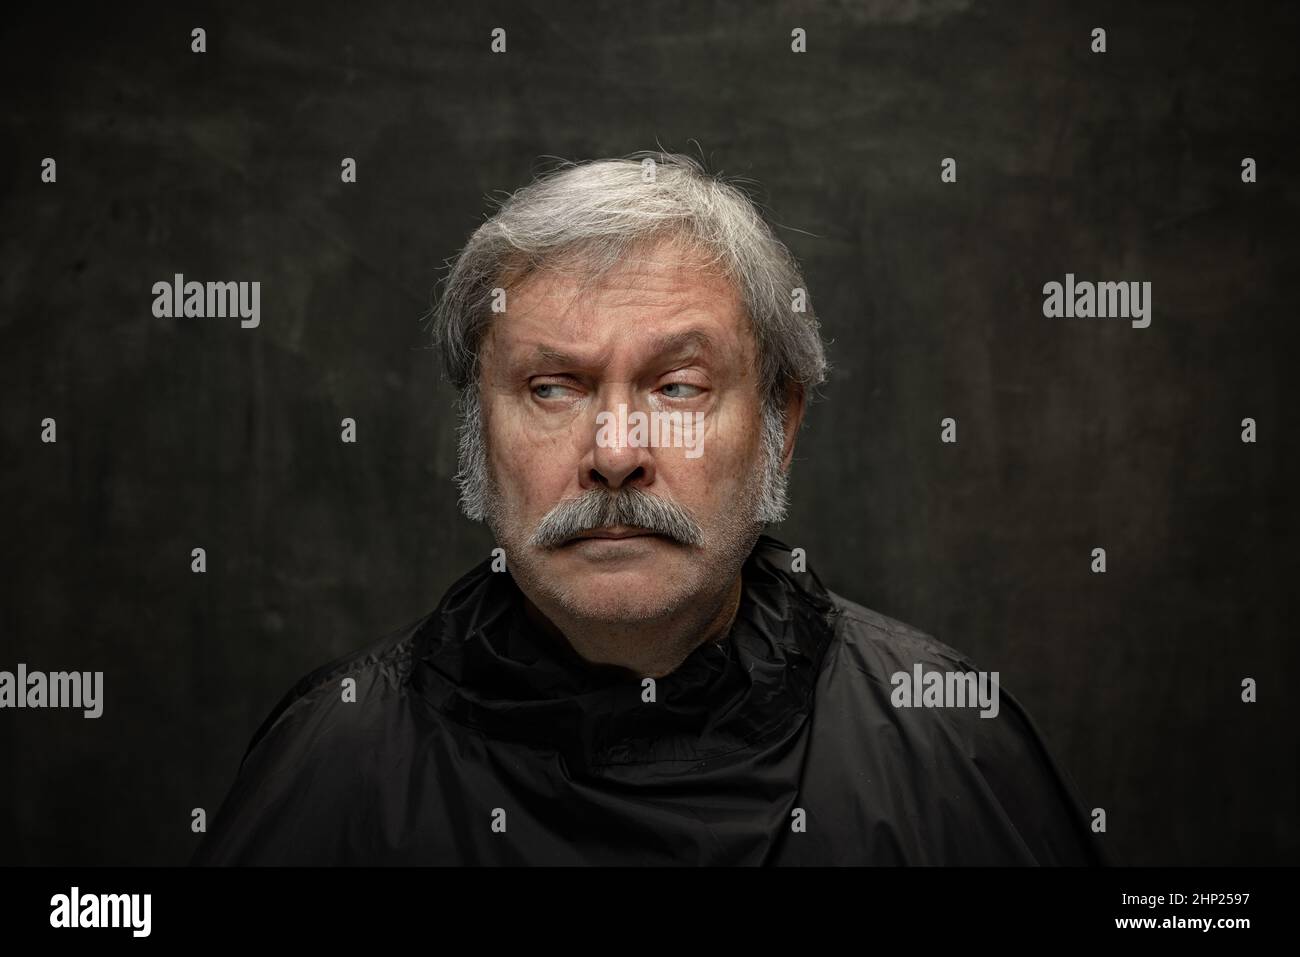 Portrait of seriuos senior man looking at camera isolated on dark vintage background. Concept of emotions, fashion, beauty, self-reinvention Stock Photo